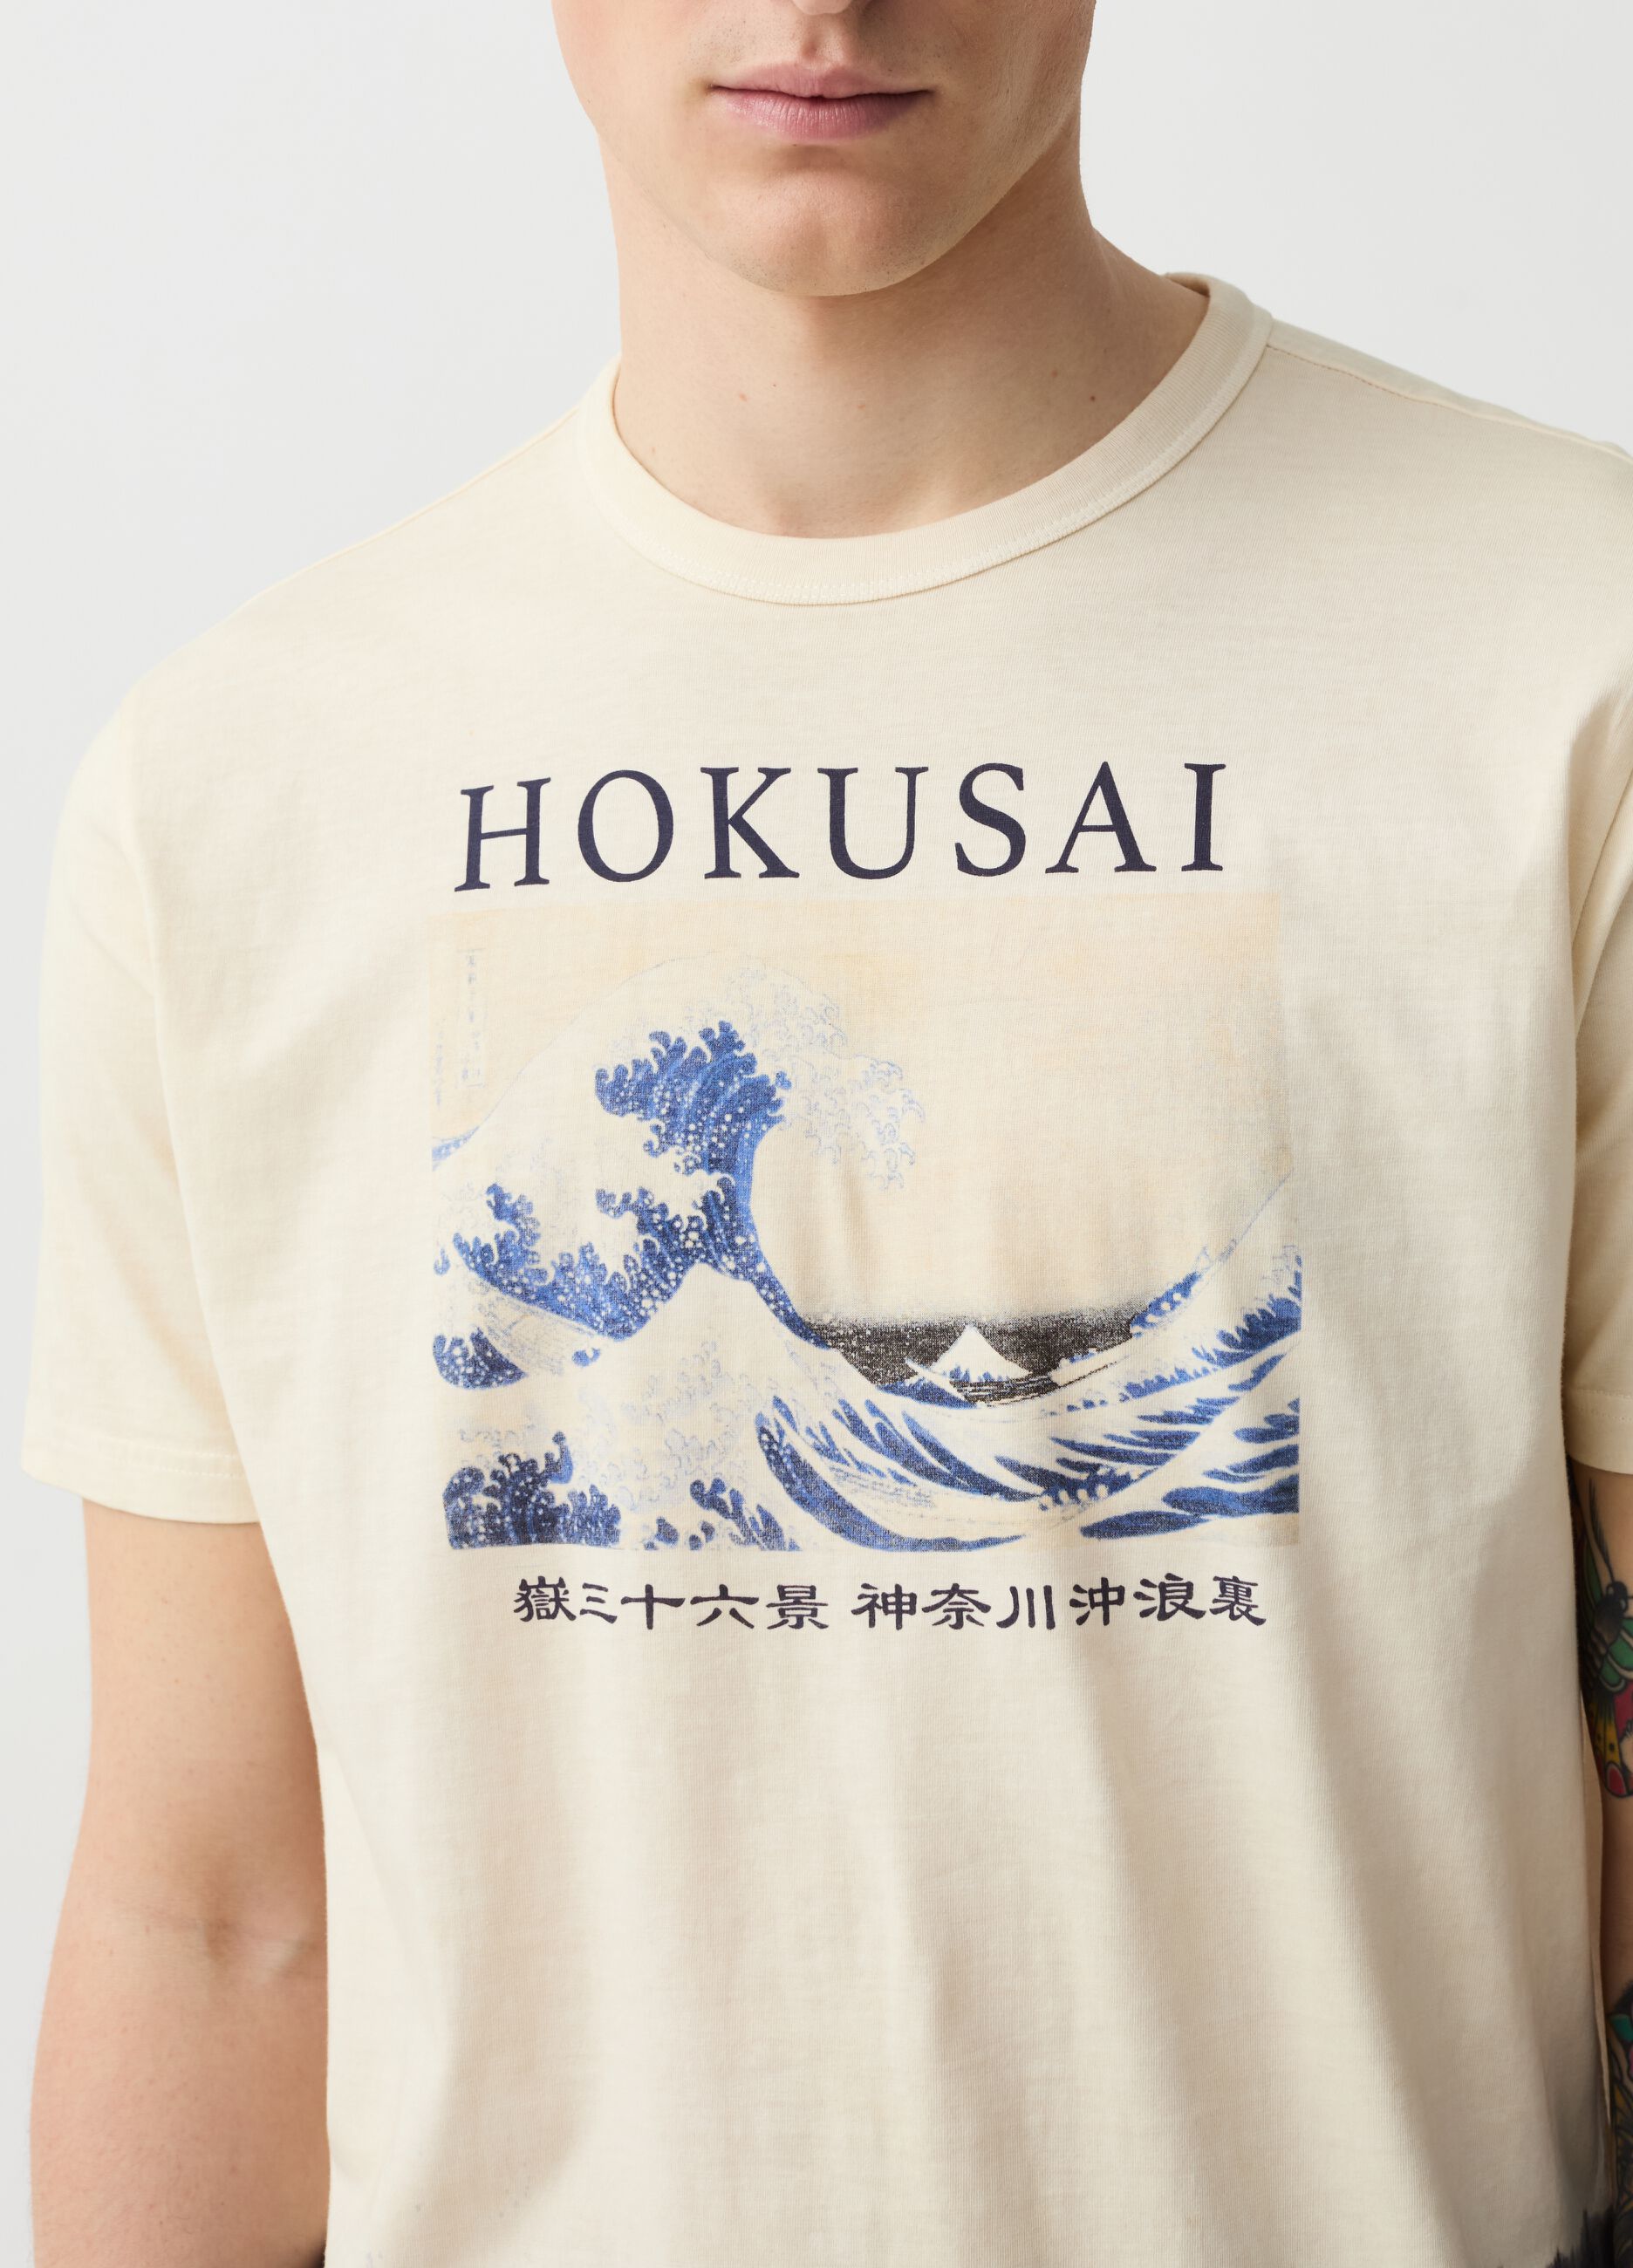 T-shirt with print of the Great Wave of Hokusai by Kanagawa